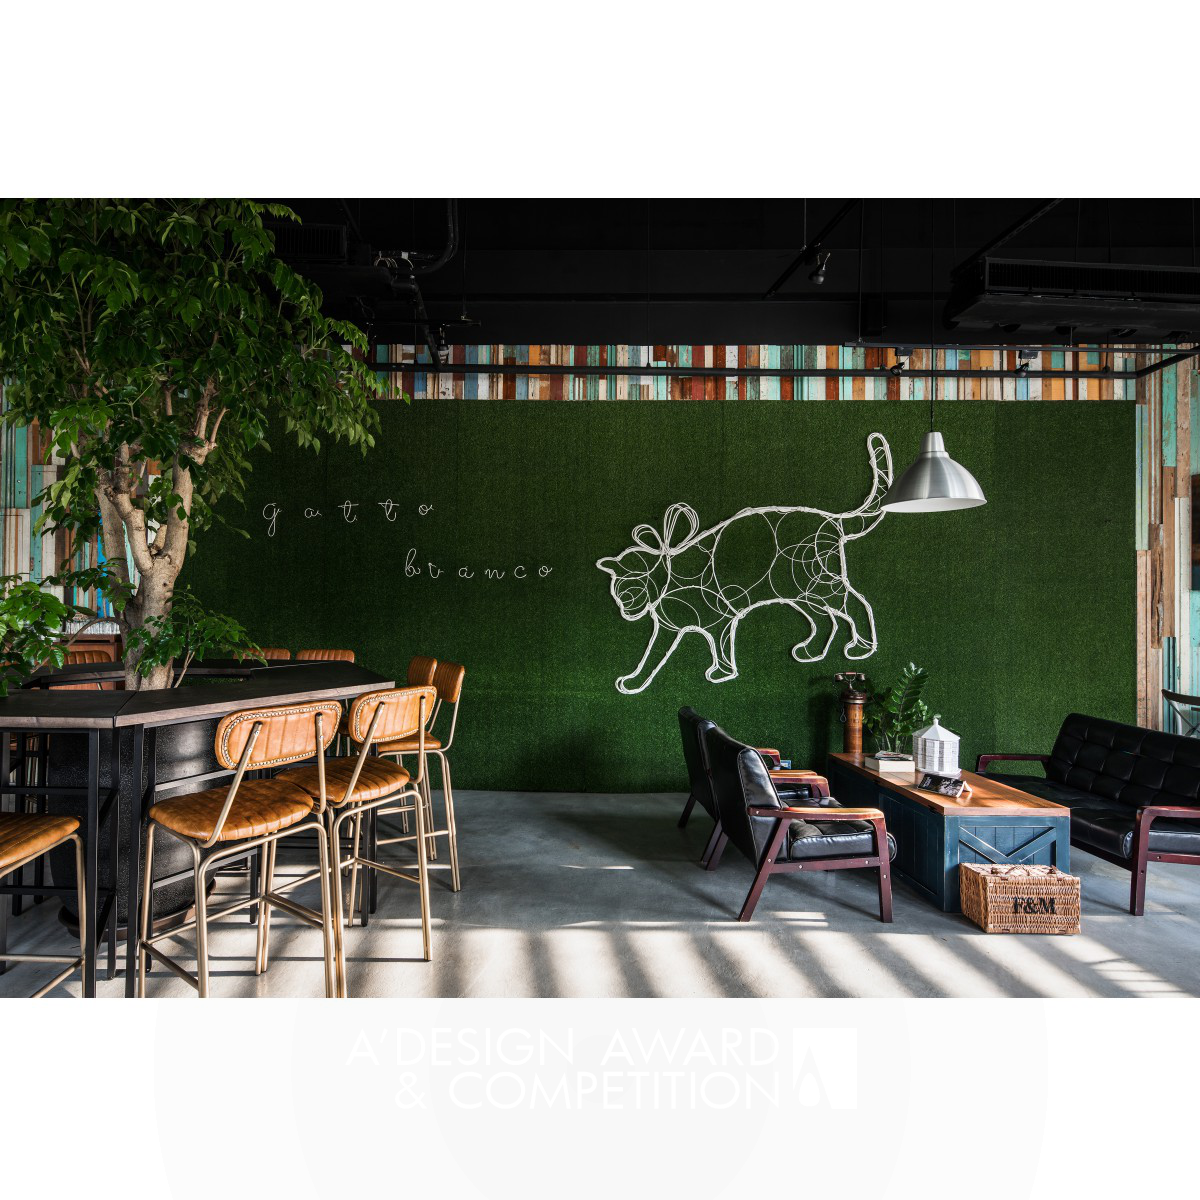 Gatto Bianco Bistro Restaurant by Hsin Ting Weng